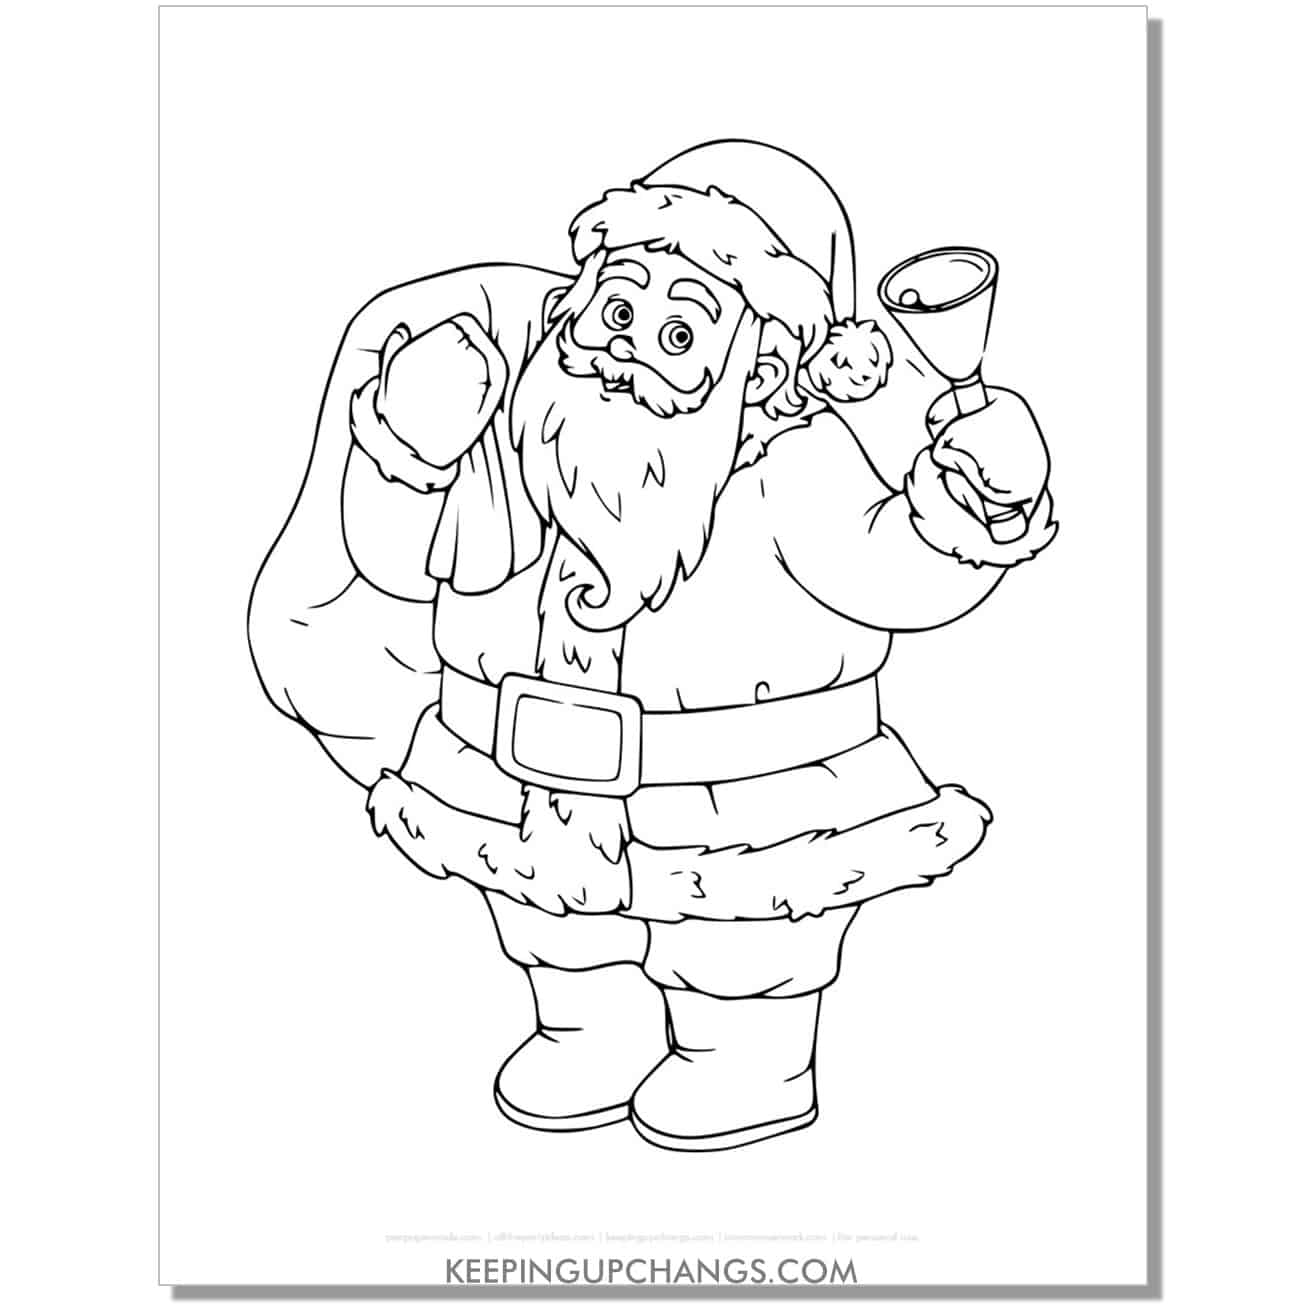 free classic, vintage santa with sack of toys and bell coloring page.